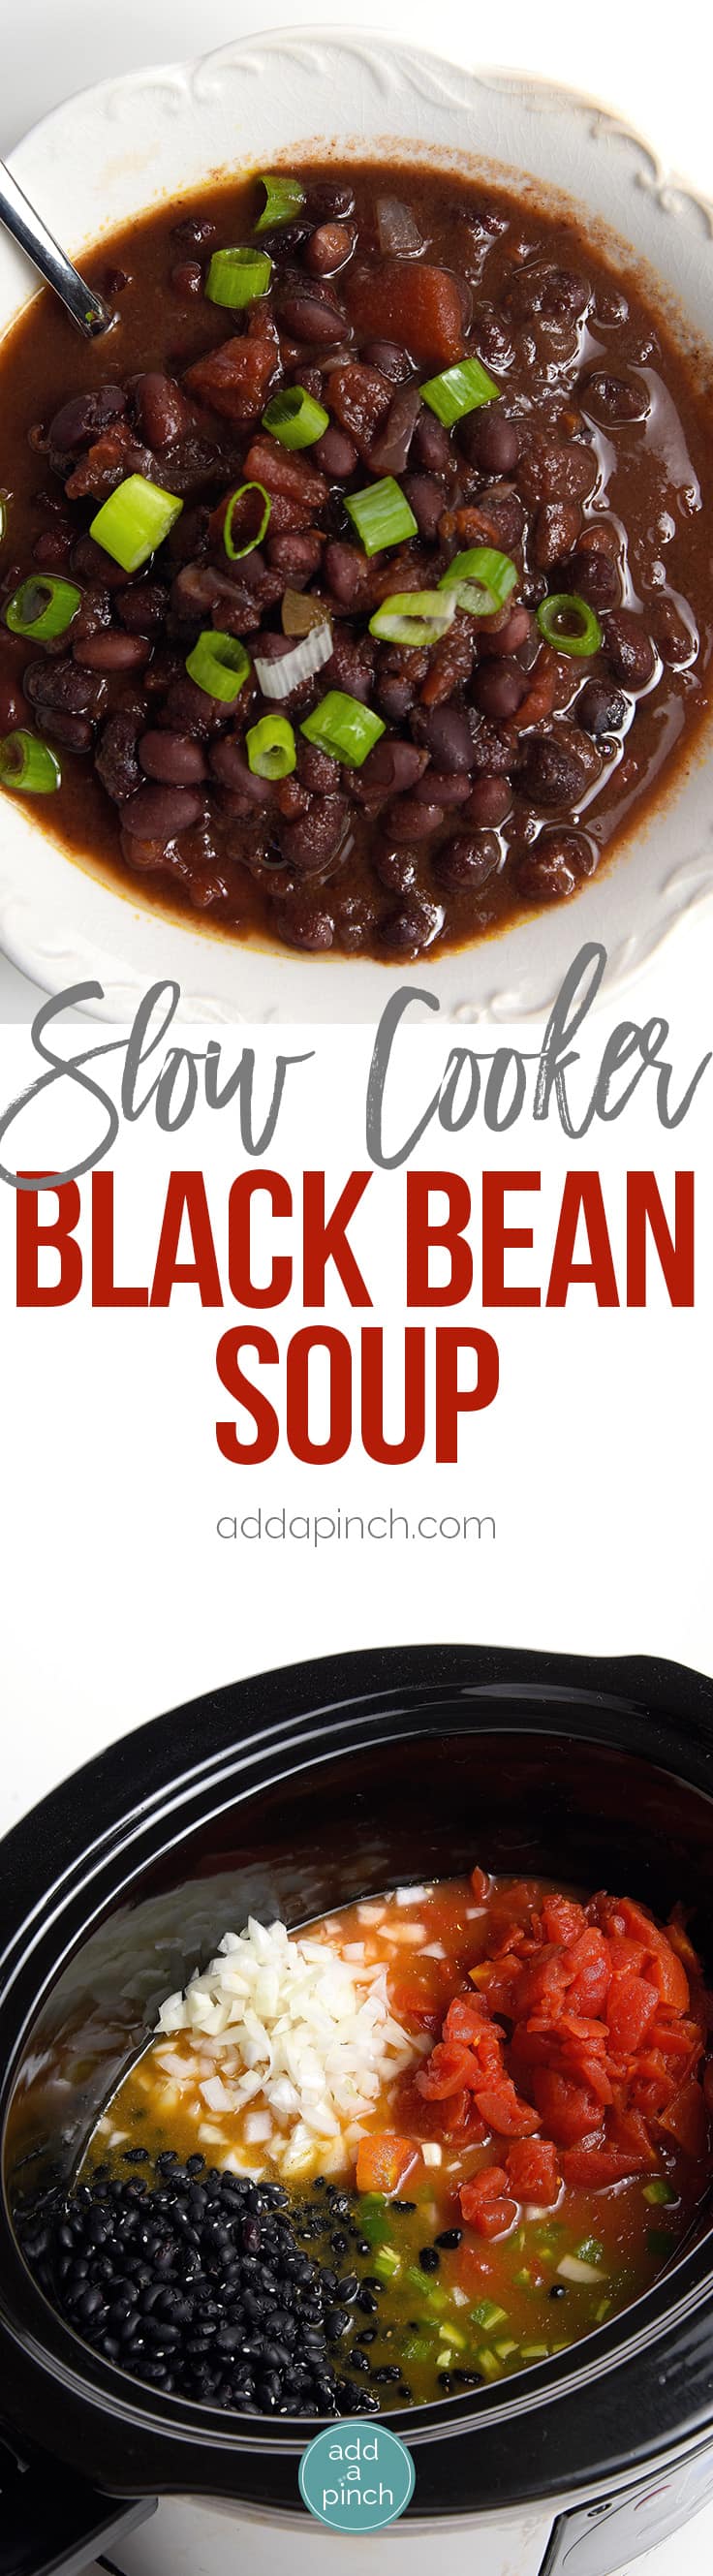 Black Bean Soup Recipe - This delicious black bean soup is packed with flavor and made even easier with the slow cooker! // addapinch.com